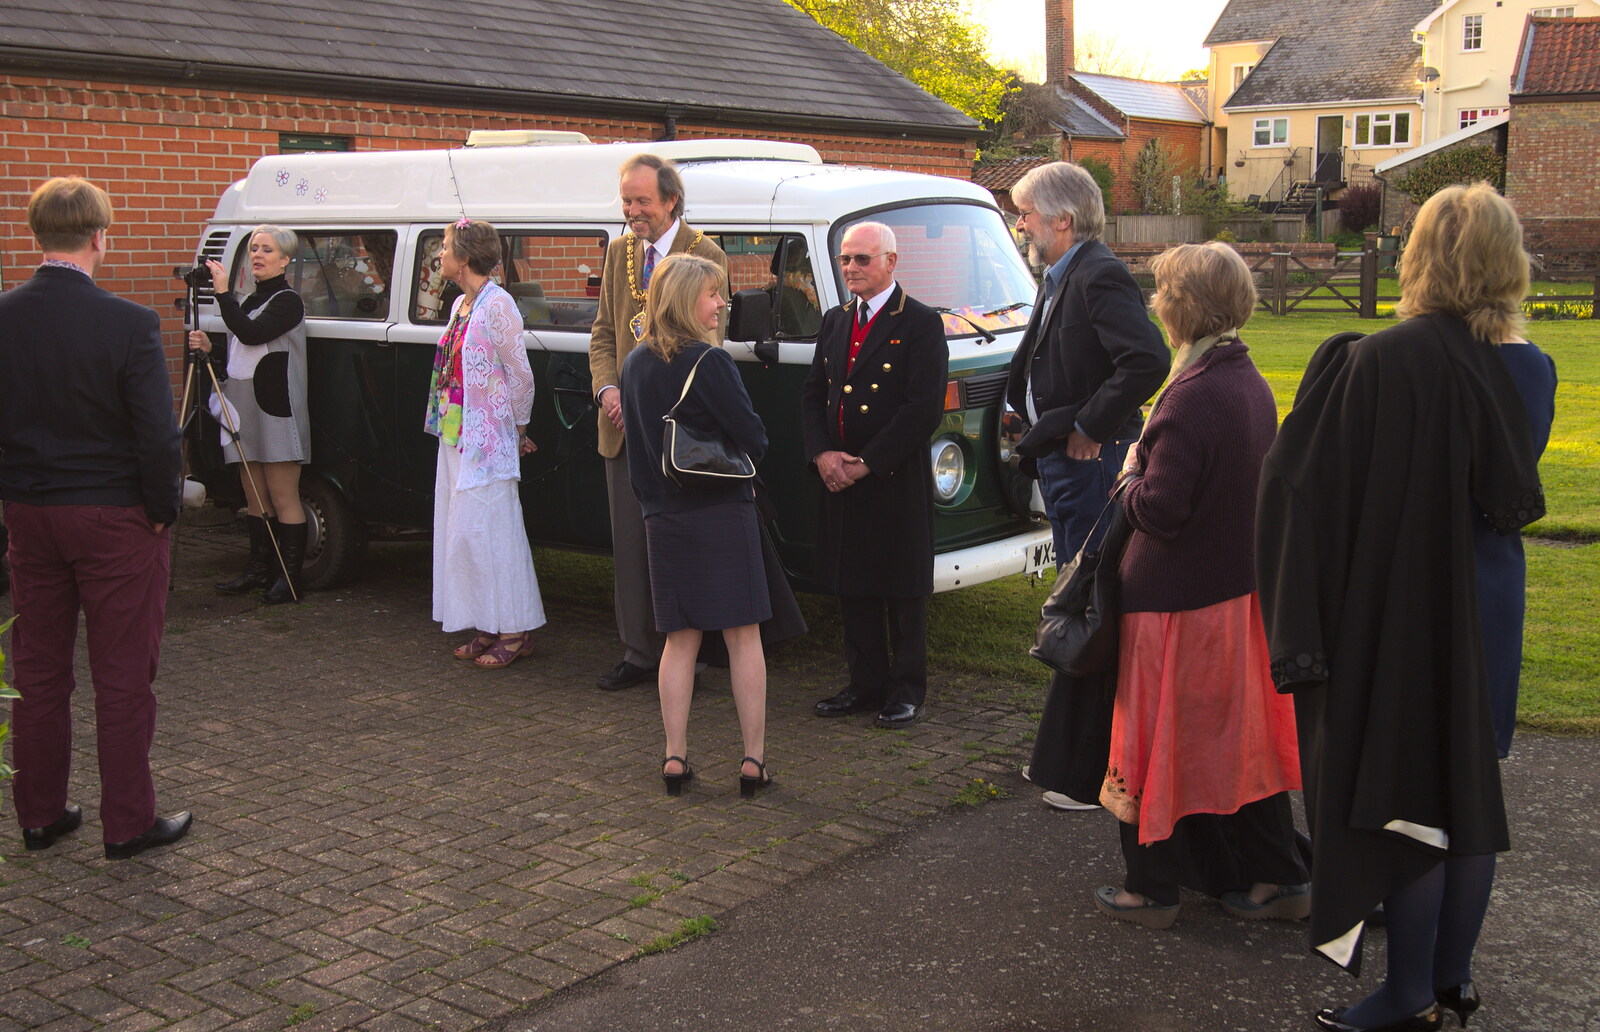 The BBs at the Mayor's Charity Ball, Town Moors, Eye, Suffolk - 4th May 2013: Merlin the Mayor greets guests